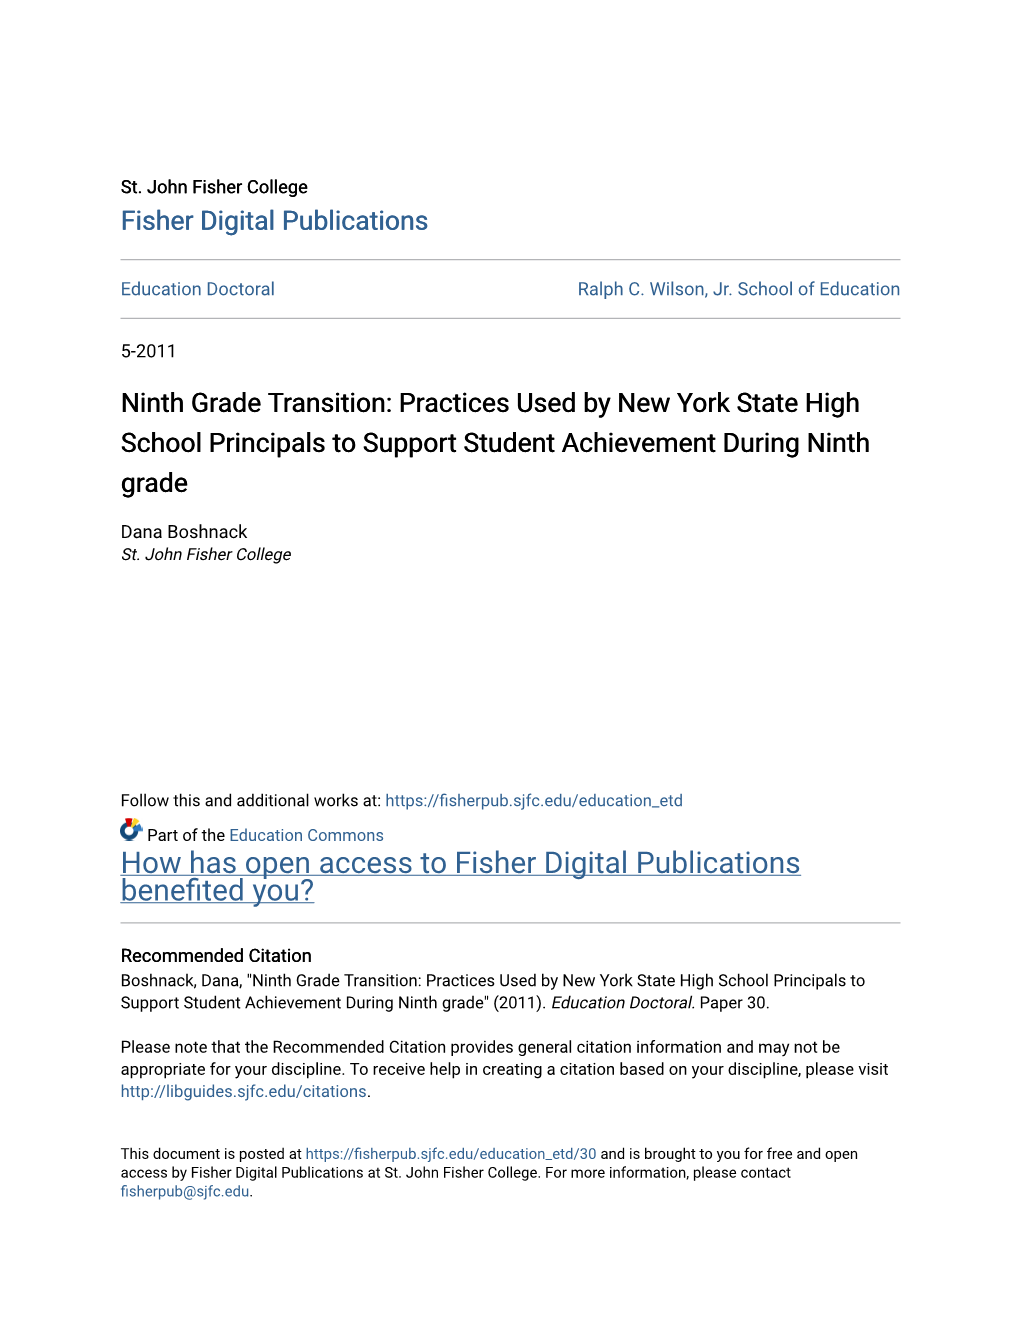 Ninth Grade Transition: Practices Used by New York State High School Principals to Support Student Achievement During Ninth Grade